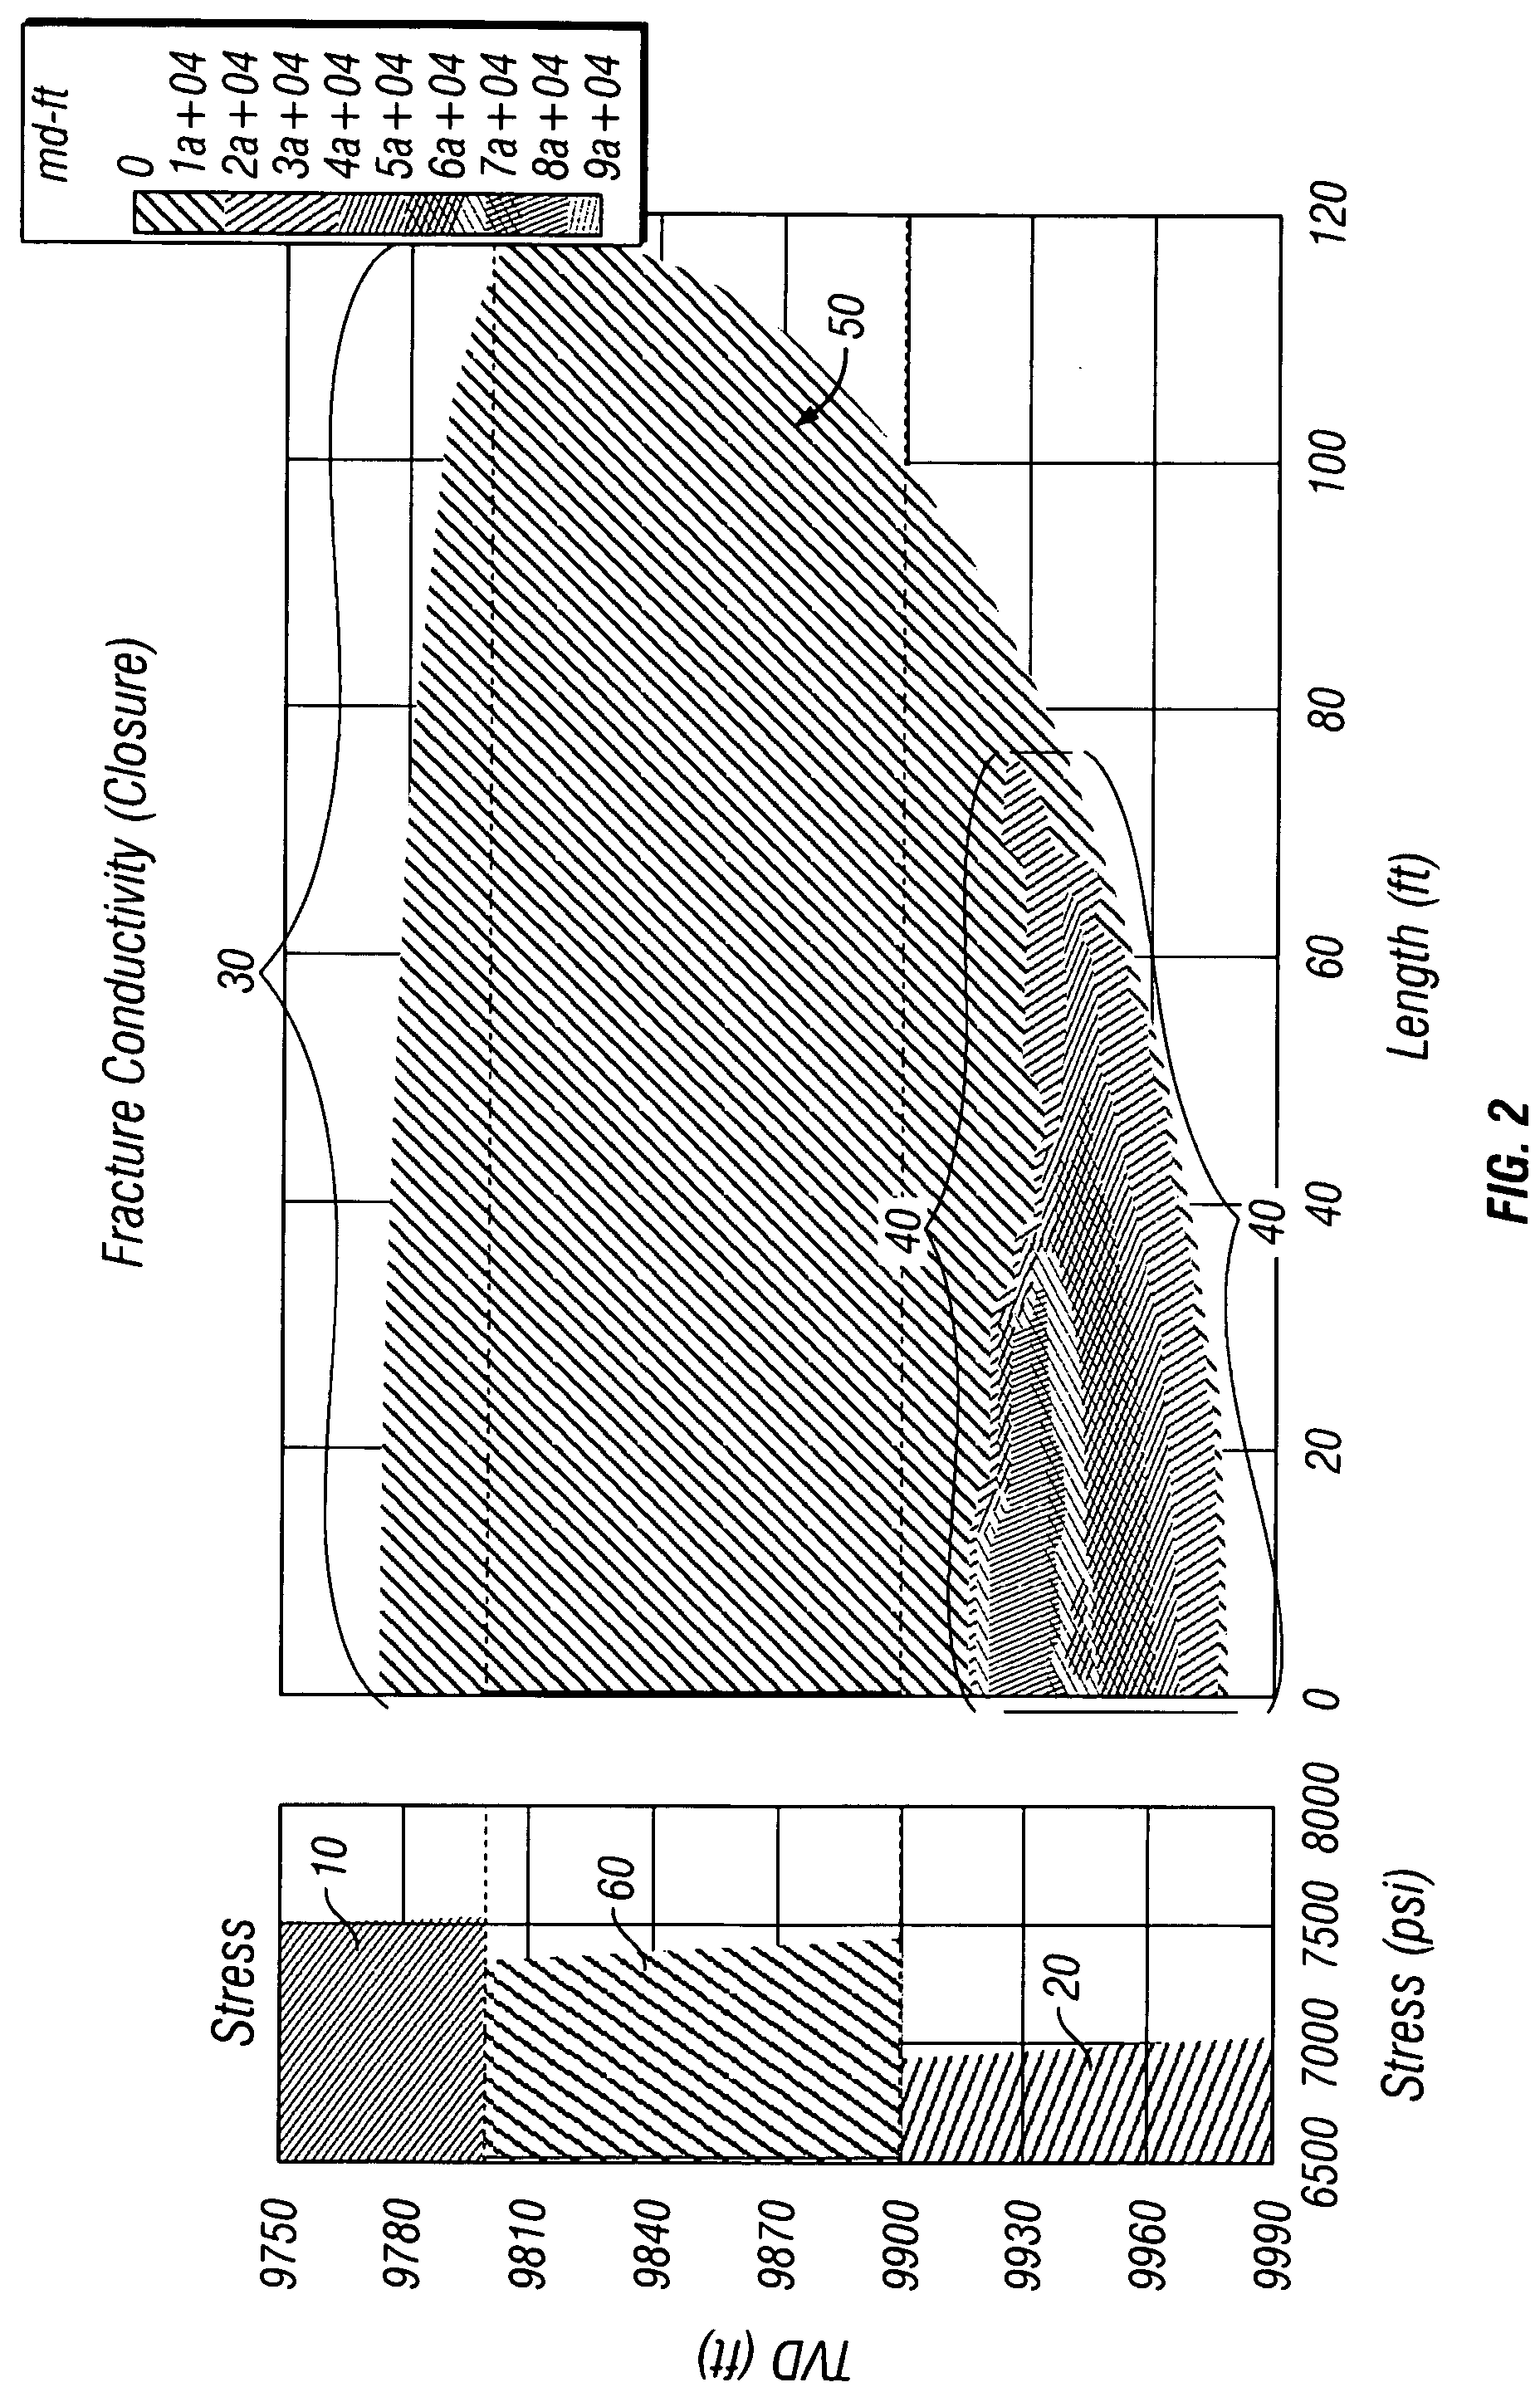 Method of hydraulic fracturing to reduce unwanted water production